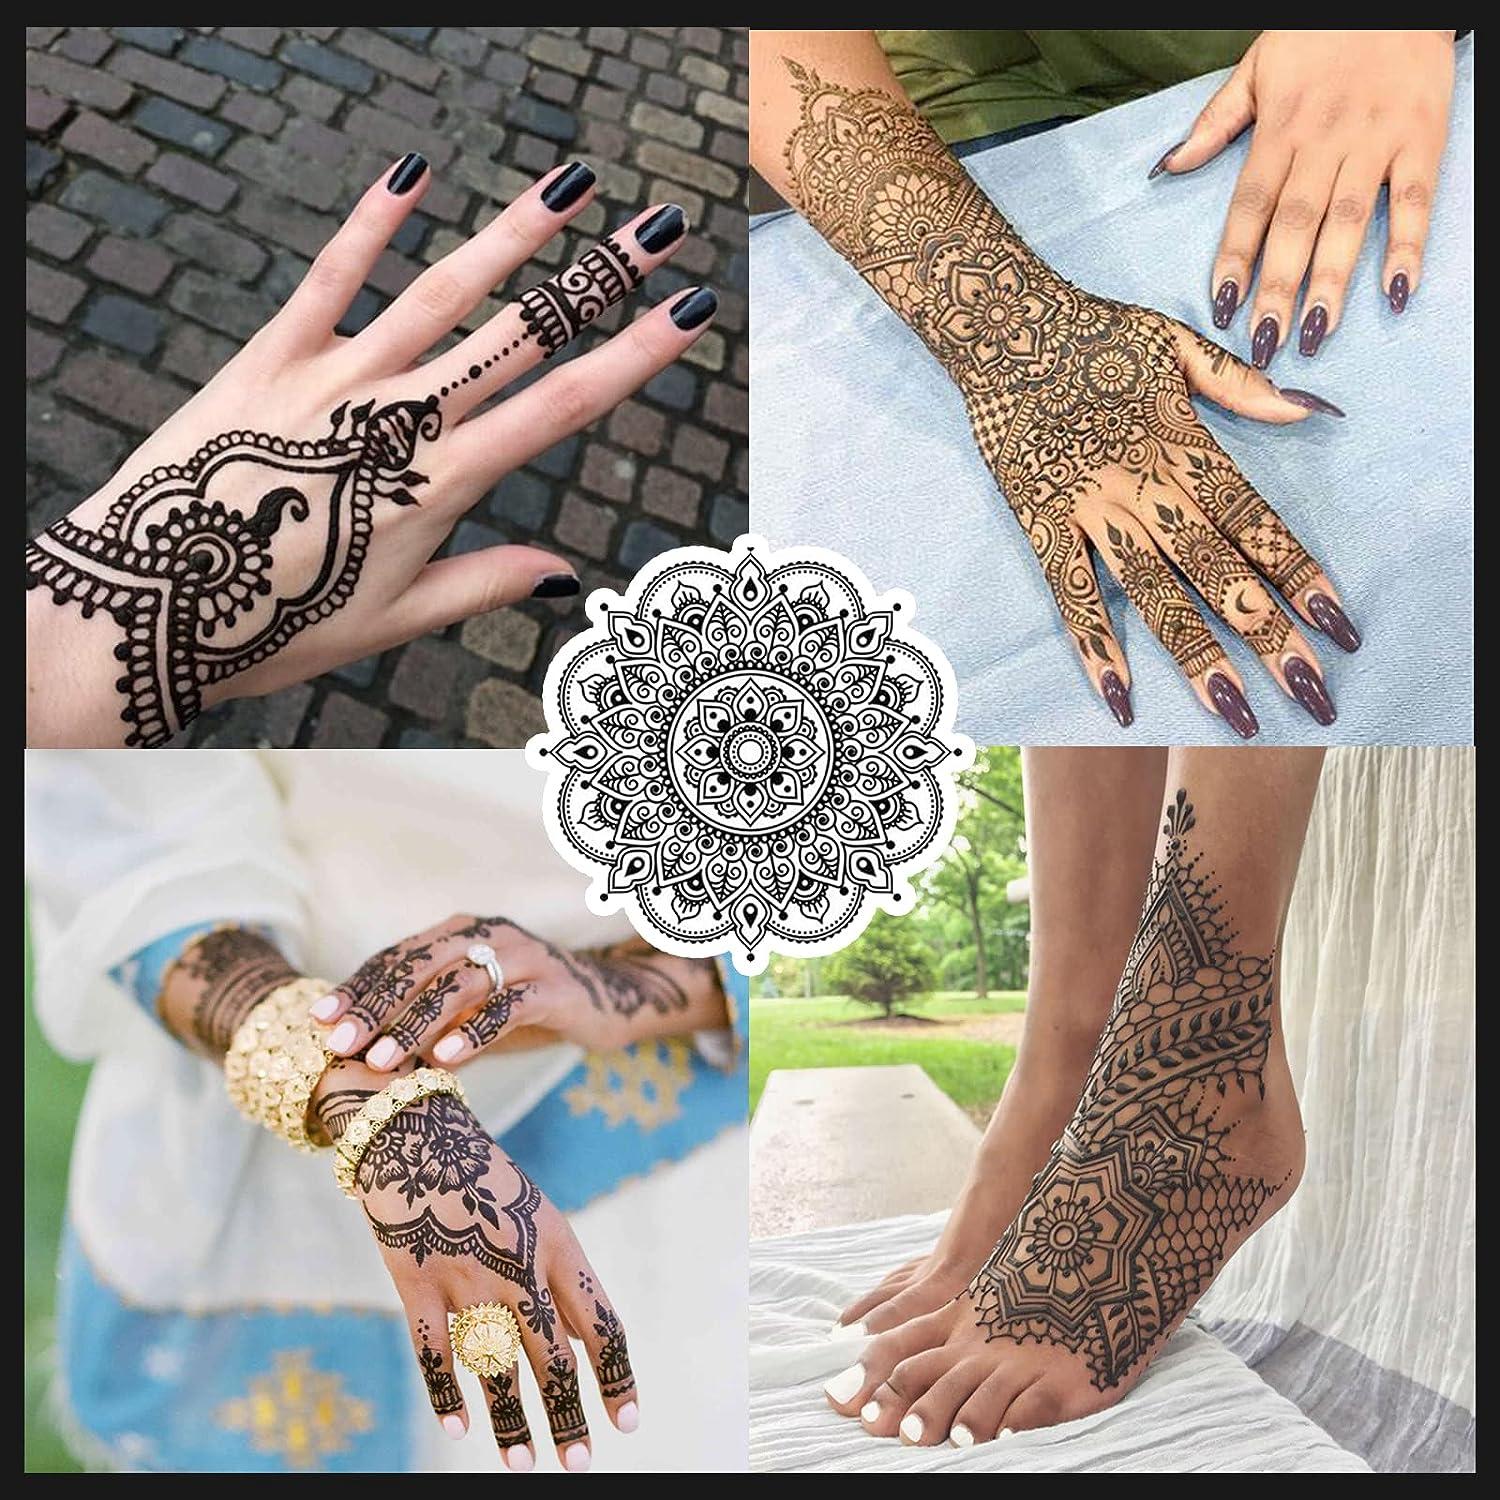 Temporary Tattoos Kit, 6Pcs Semi Permanent Tattoo Paste Cones, India Body  DIY Art Painting for Women Men Kids, Summer Trend Freehand Plaste with 3